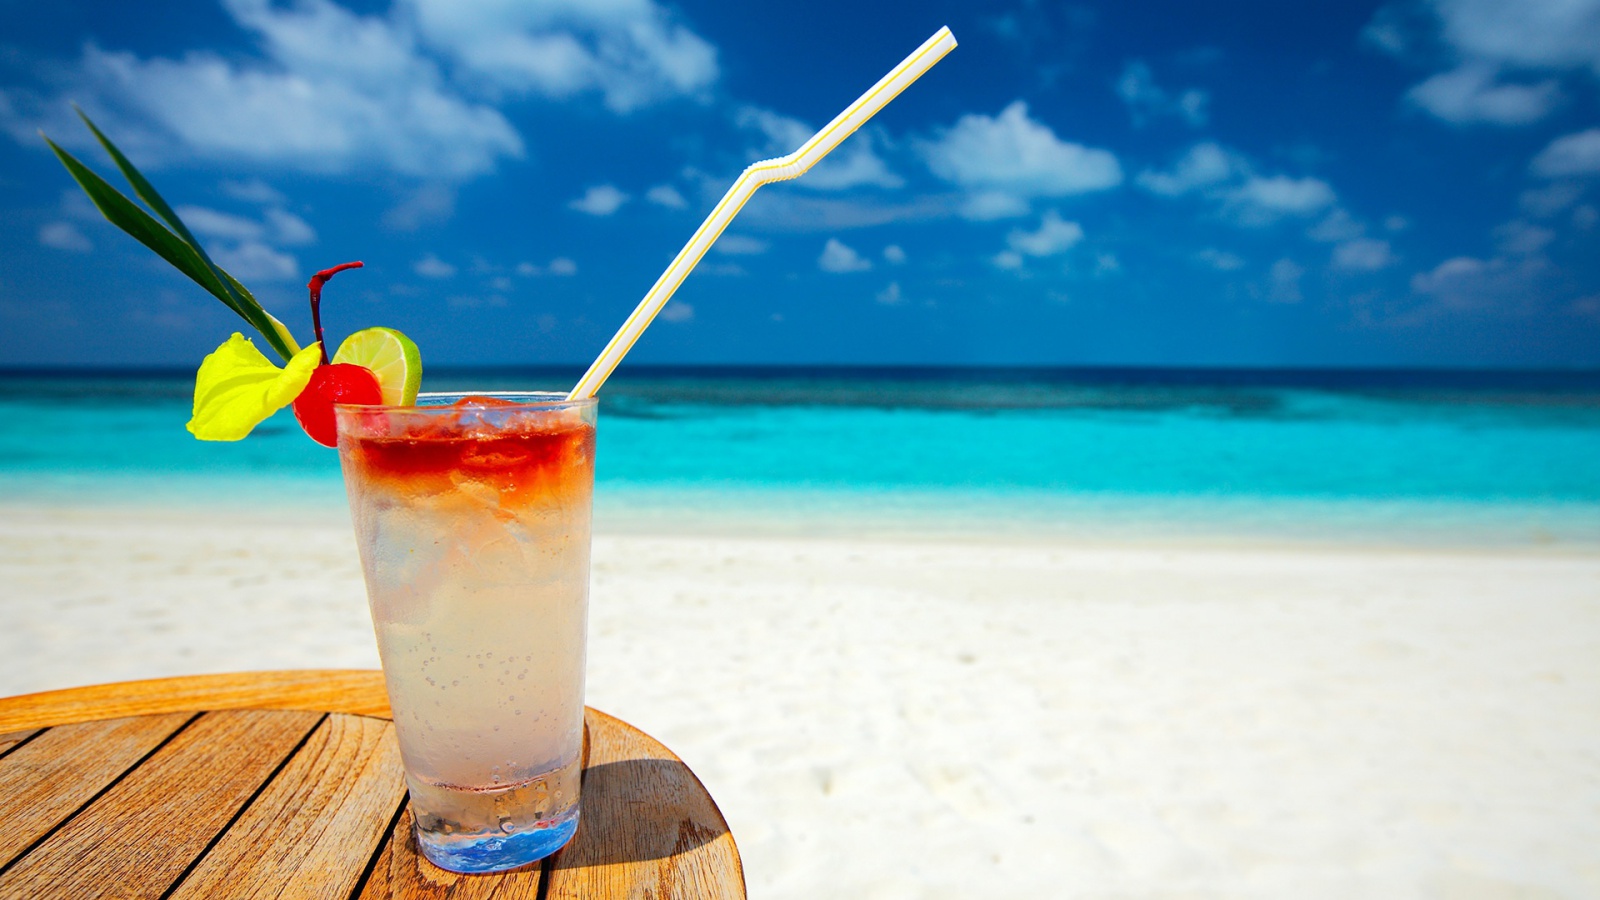 A Drink At The Beach Wallpaper Desktop Background In